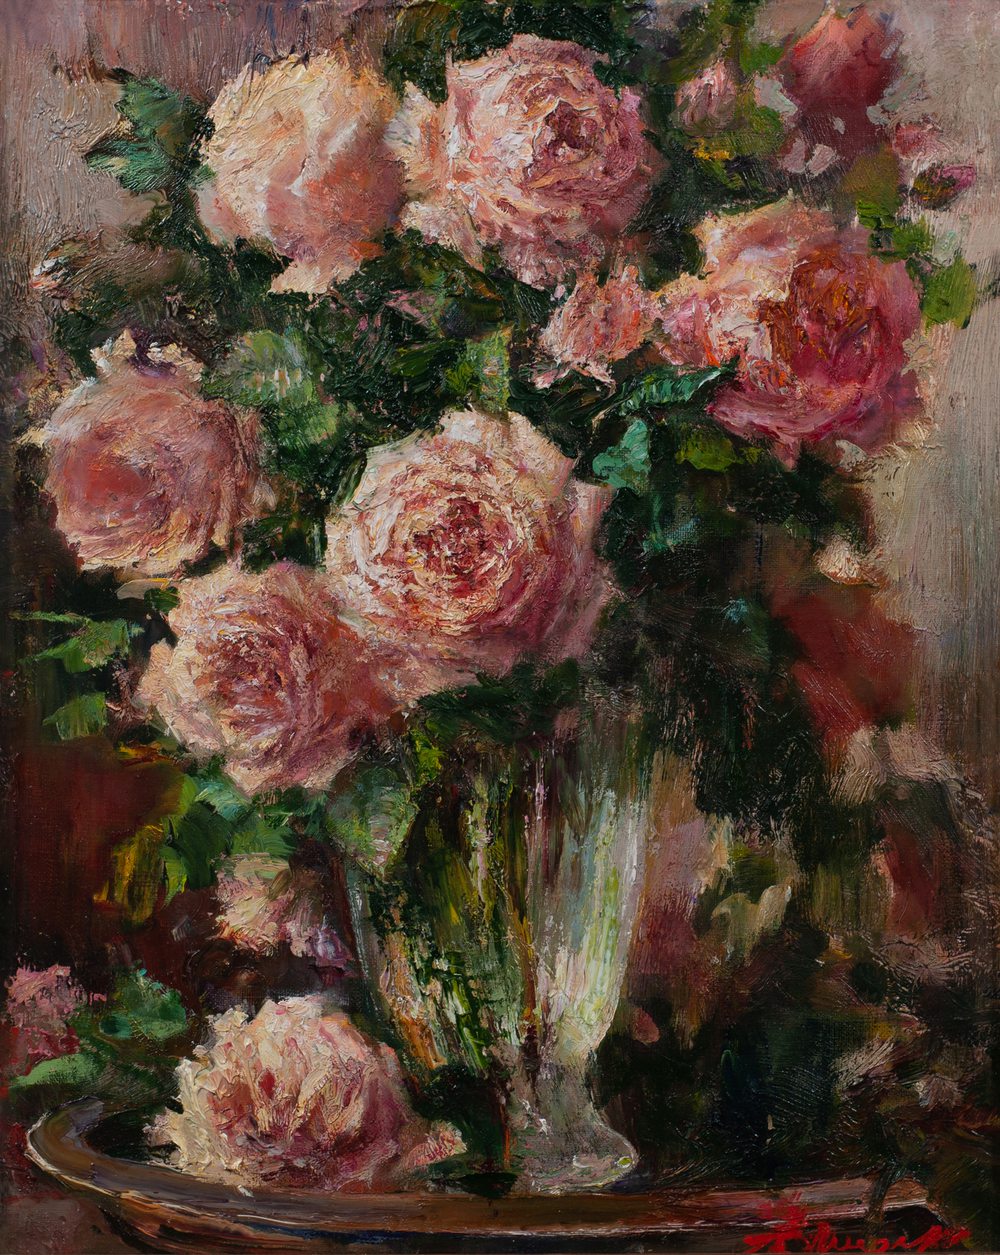 Oil painting on canvas ❀ Still life with roses